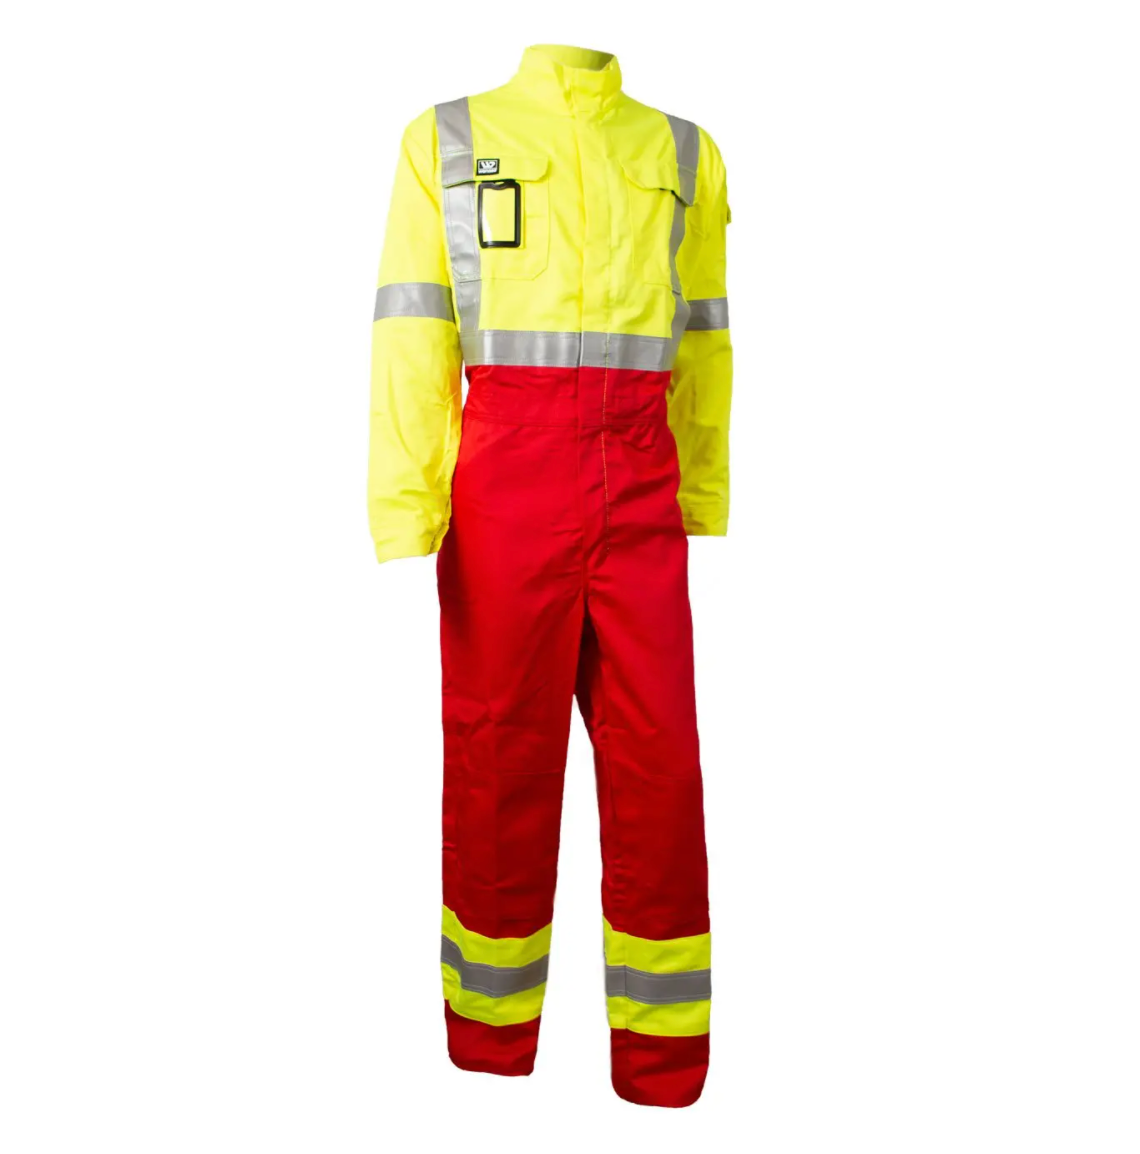 Wenaas Offshore Daletec CSA FR Premium Coverall | Red/Yellow | Sizes S - 4XL, Large